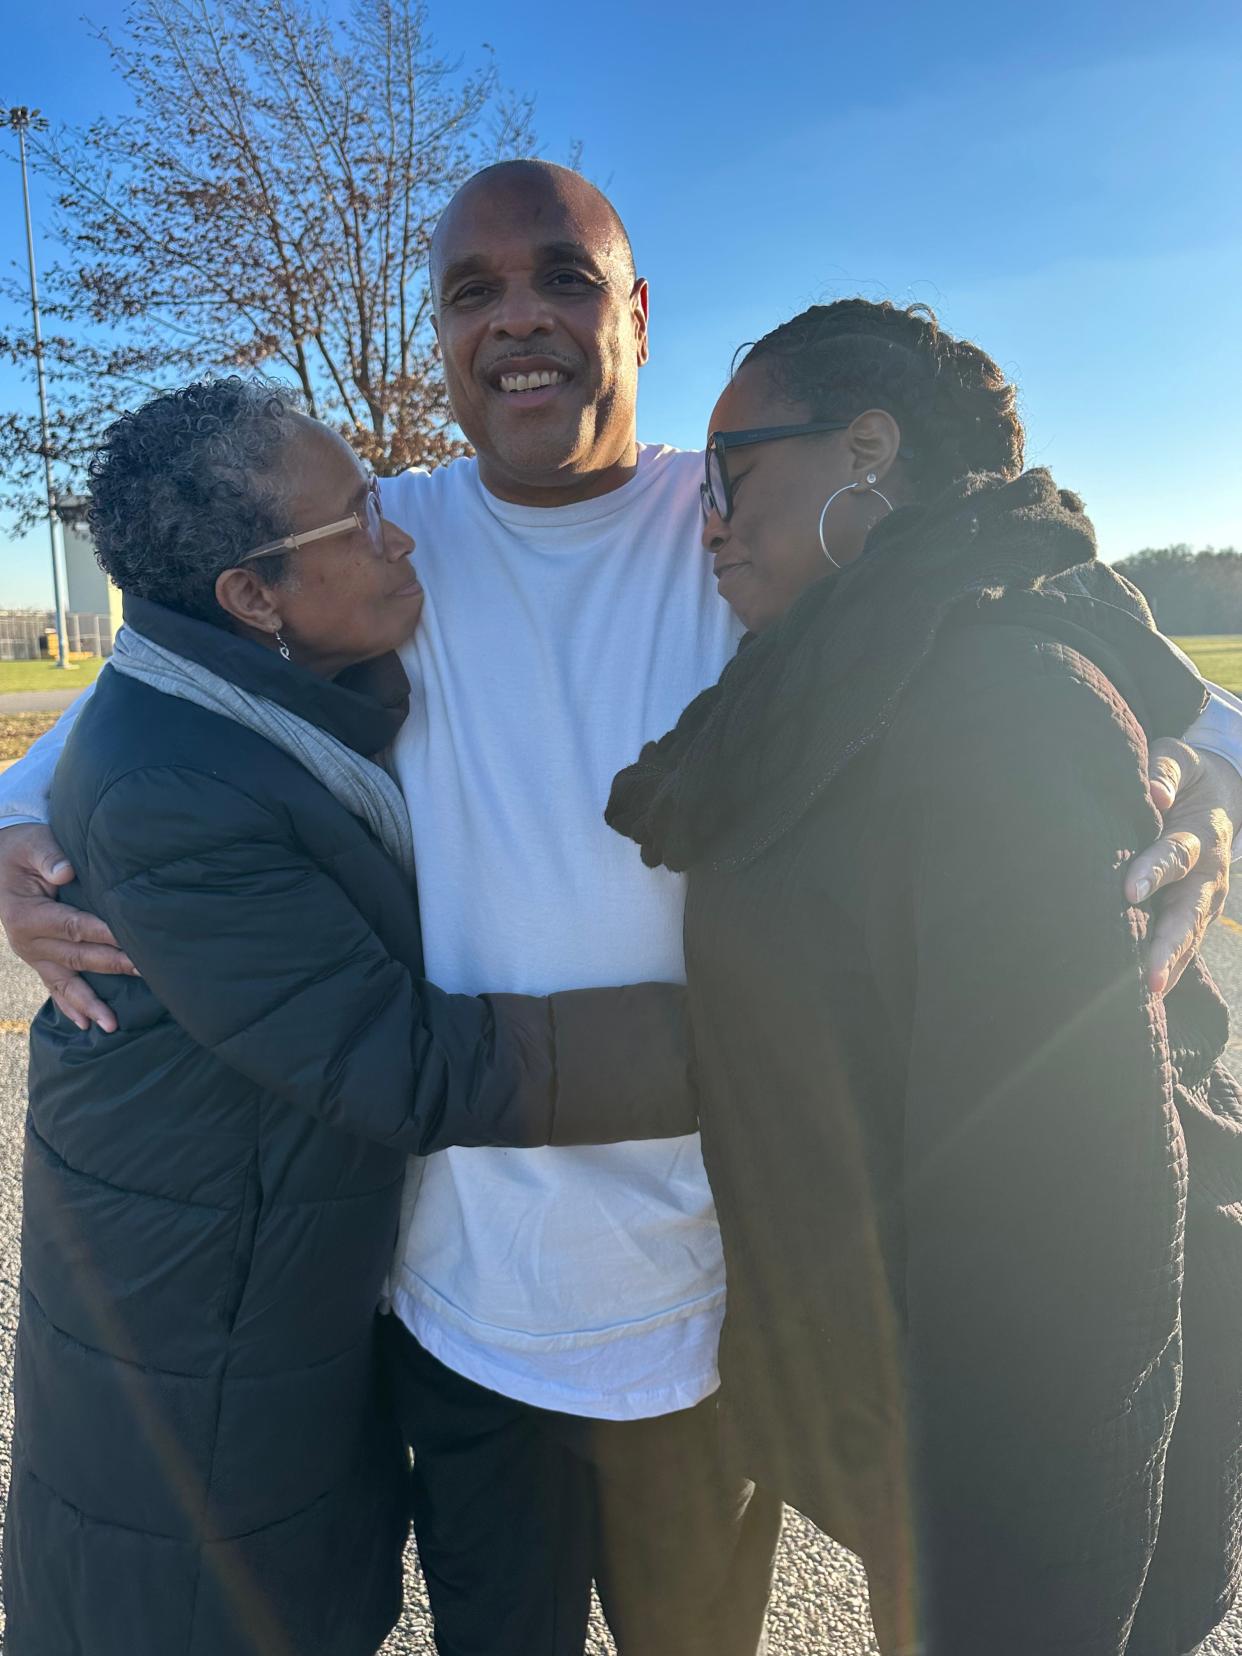 Brian Beals, wrongfully imprisoned for 35 years after being convicted of allegedly killing a 6-year-old in Chicago in 1988, greets his sister Pattilyn and his niece Tamiko Tuesday, Dec. 12, 2023 after he was released from Robinson Correctional Center in Robinson. Beals was exonerated in the case after evidence provided by the Illinois Innocence Project revealed that he was the target of the attack that killed Demetrius Campbell in the Englewood neighborhood on the city's south side.